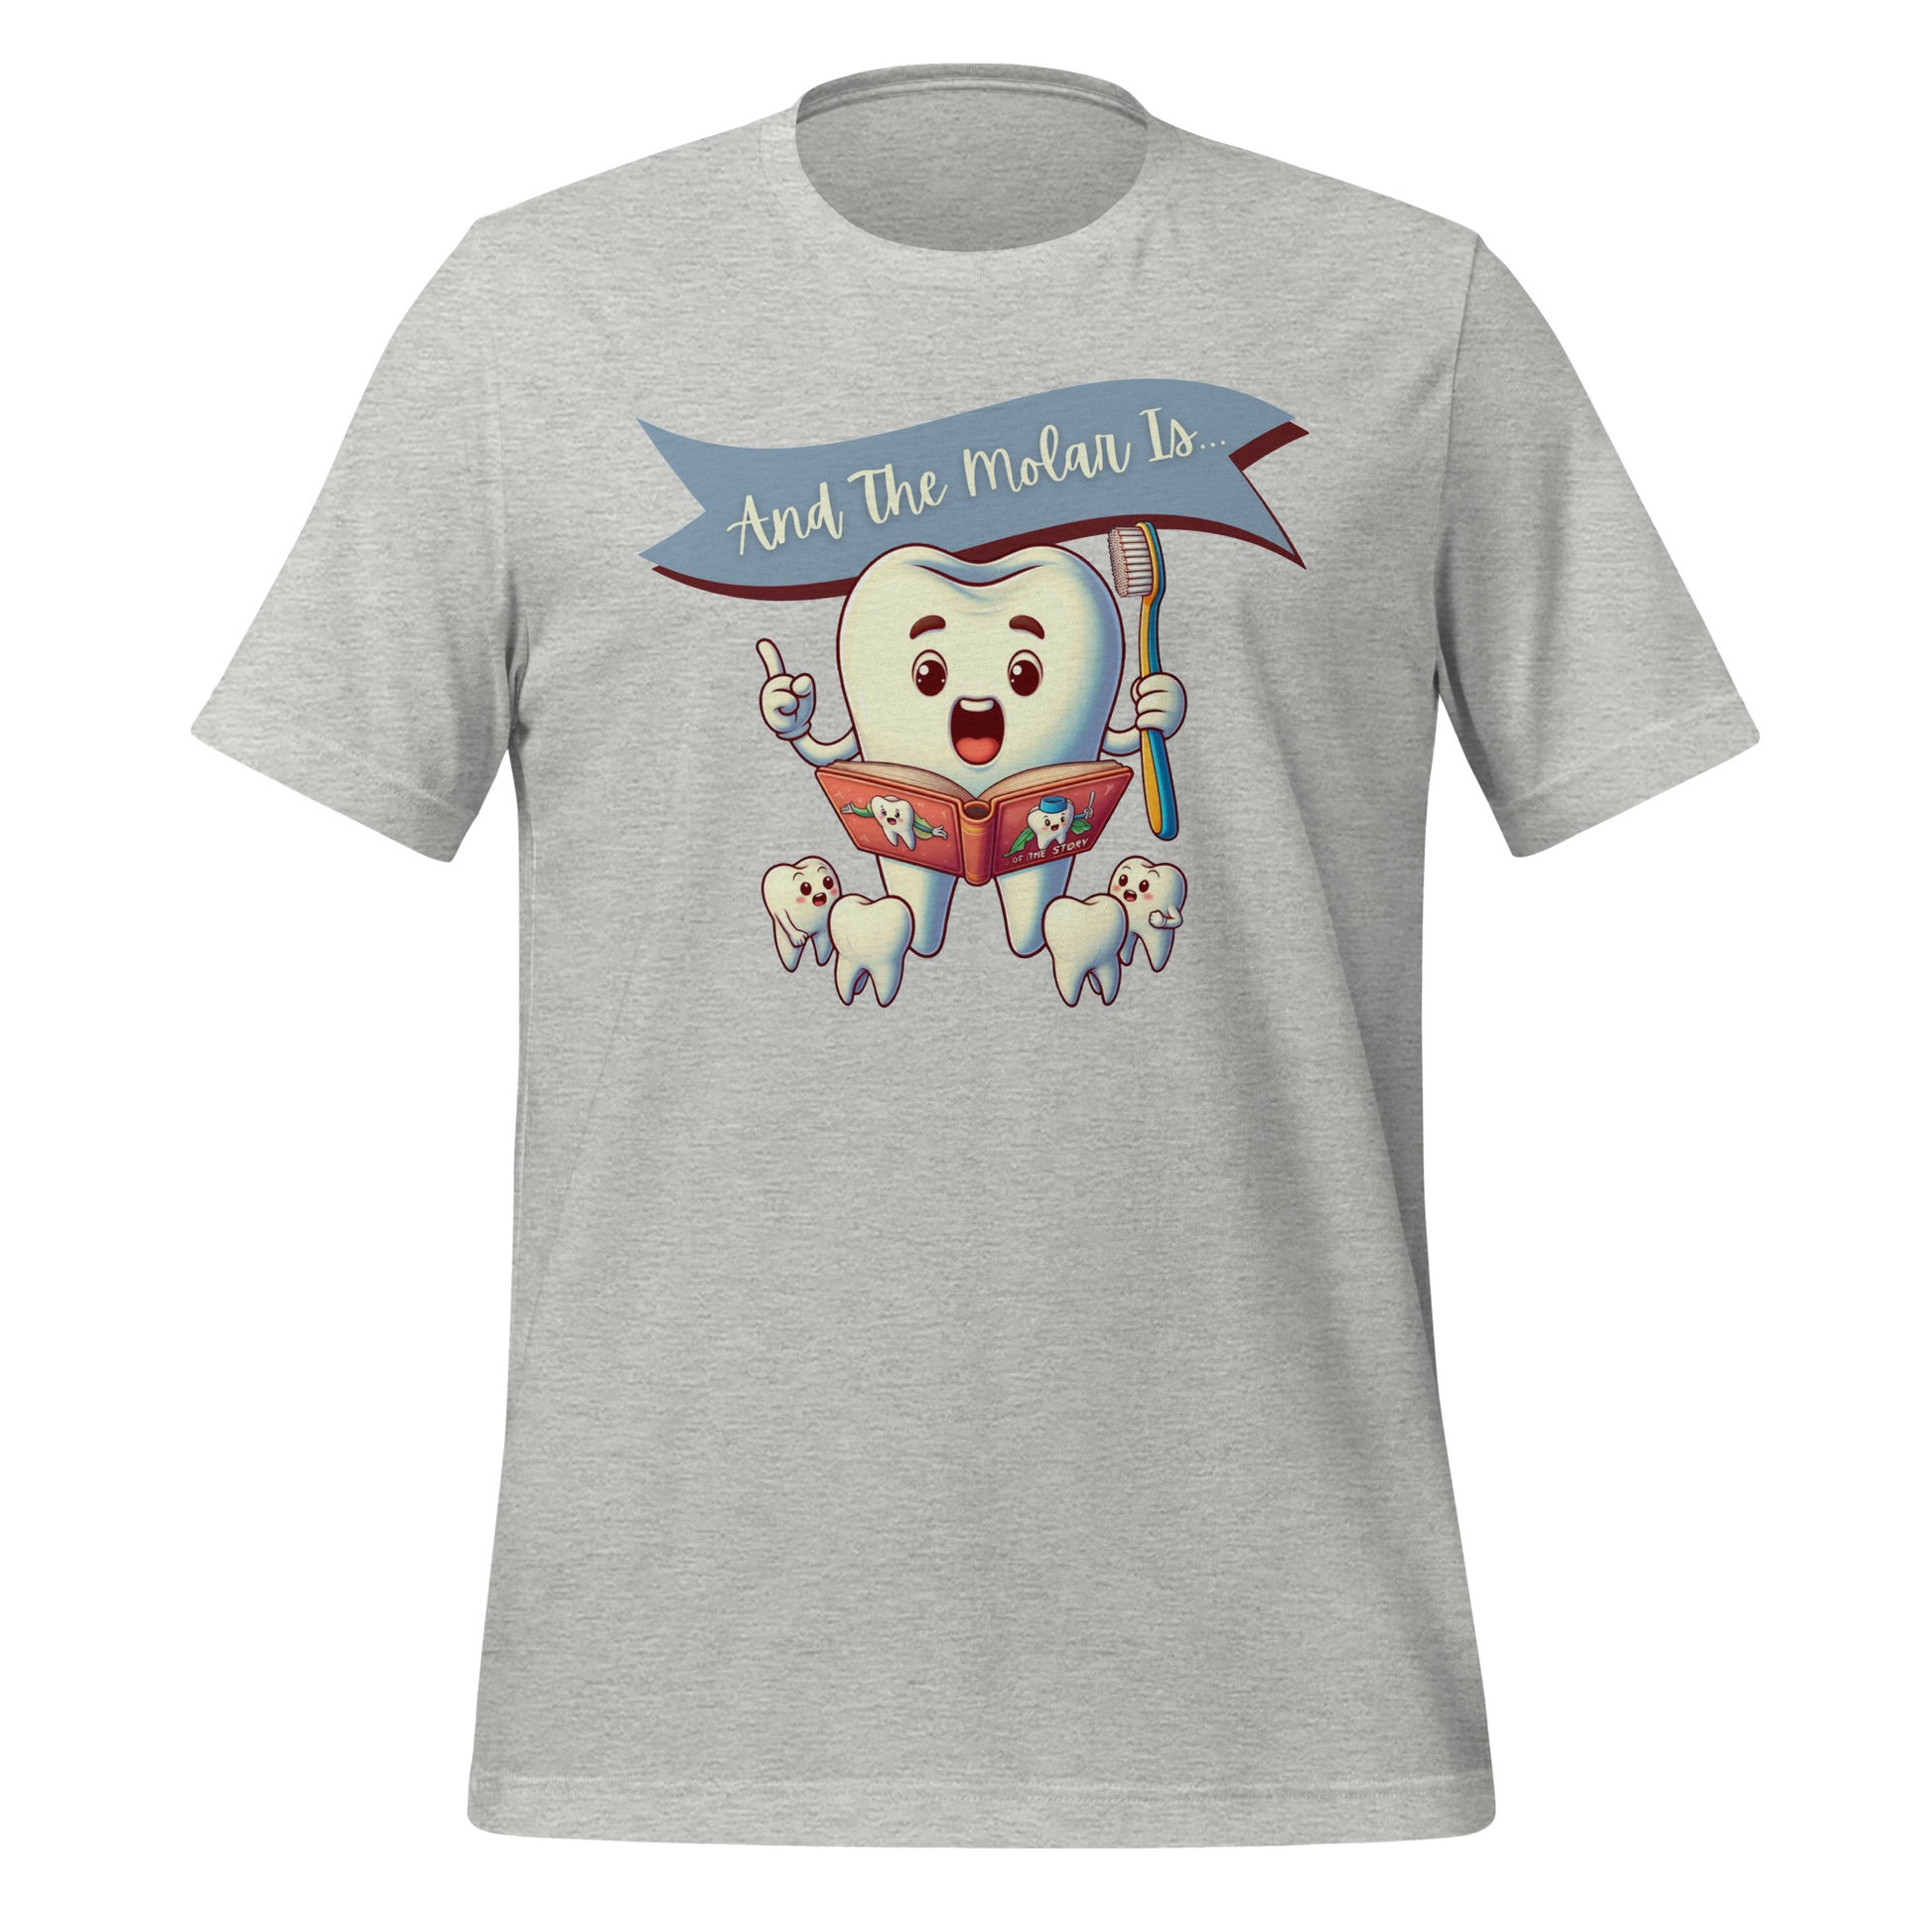 Cute dental shirt featuring a smiling tooth character reading a book with the caption ‘And The Molar Is,’ surrounded by smaller tooth characters. Athletic heather color.